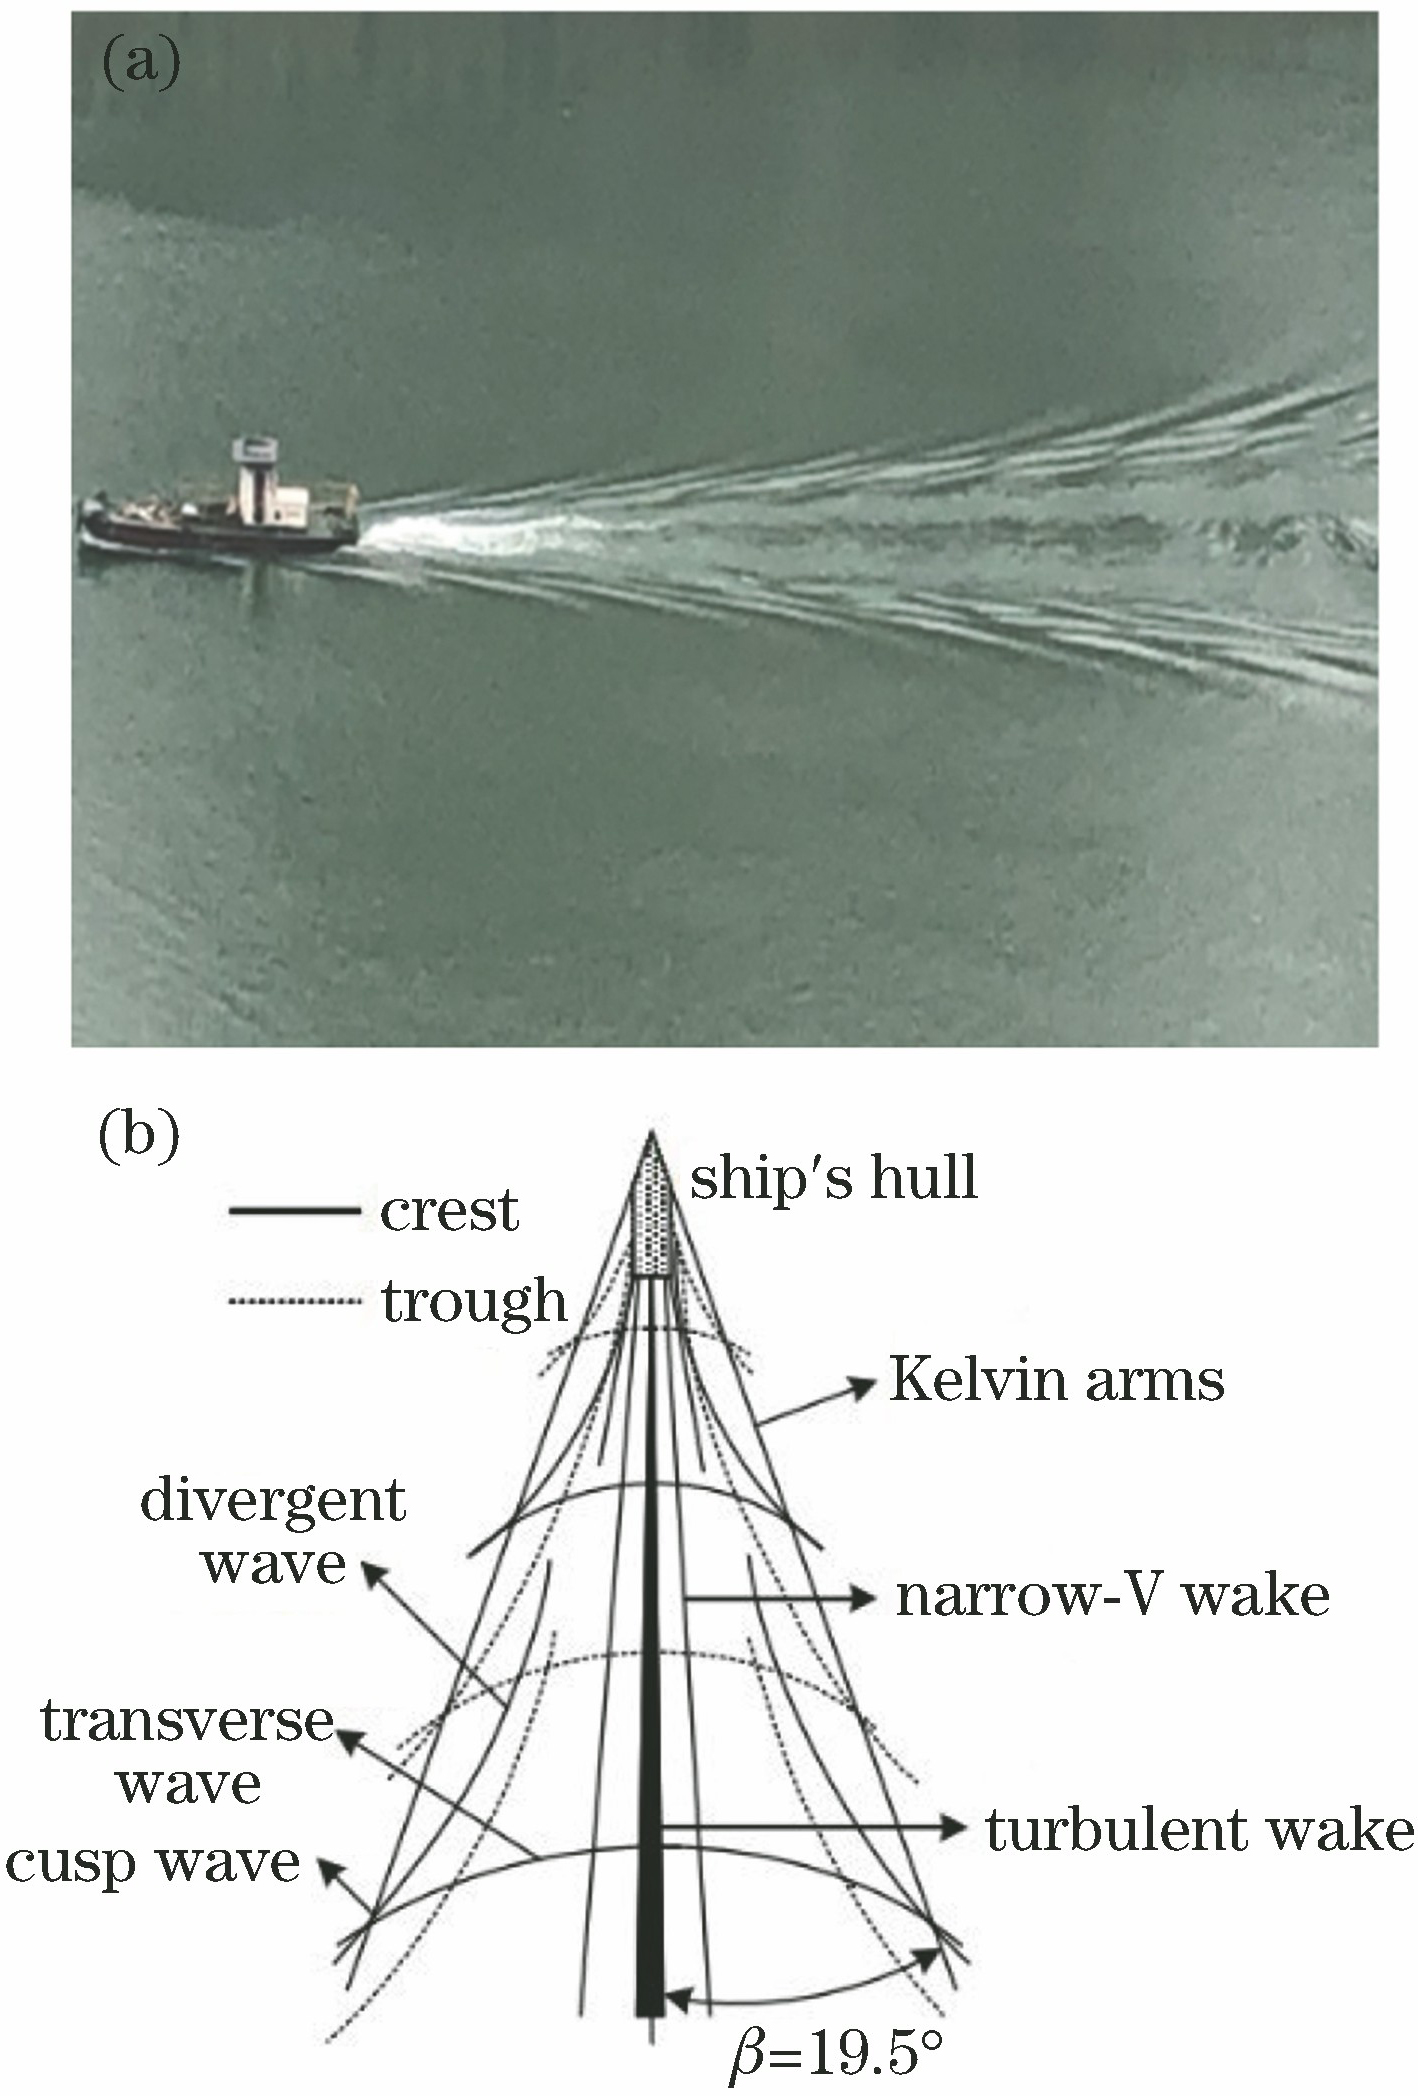 Ship's wake and components of the wake. (a) Actual ship's wake; (b) geometric relationship of wake components